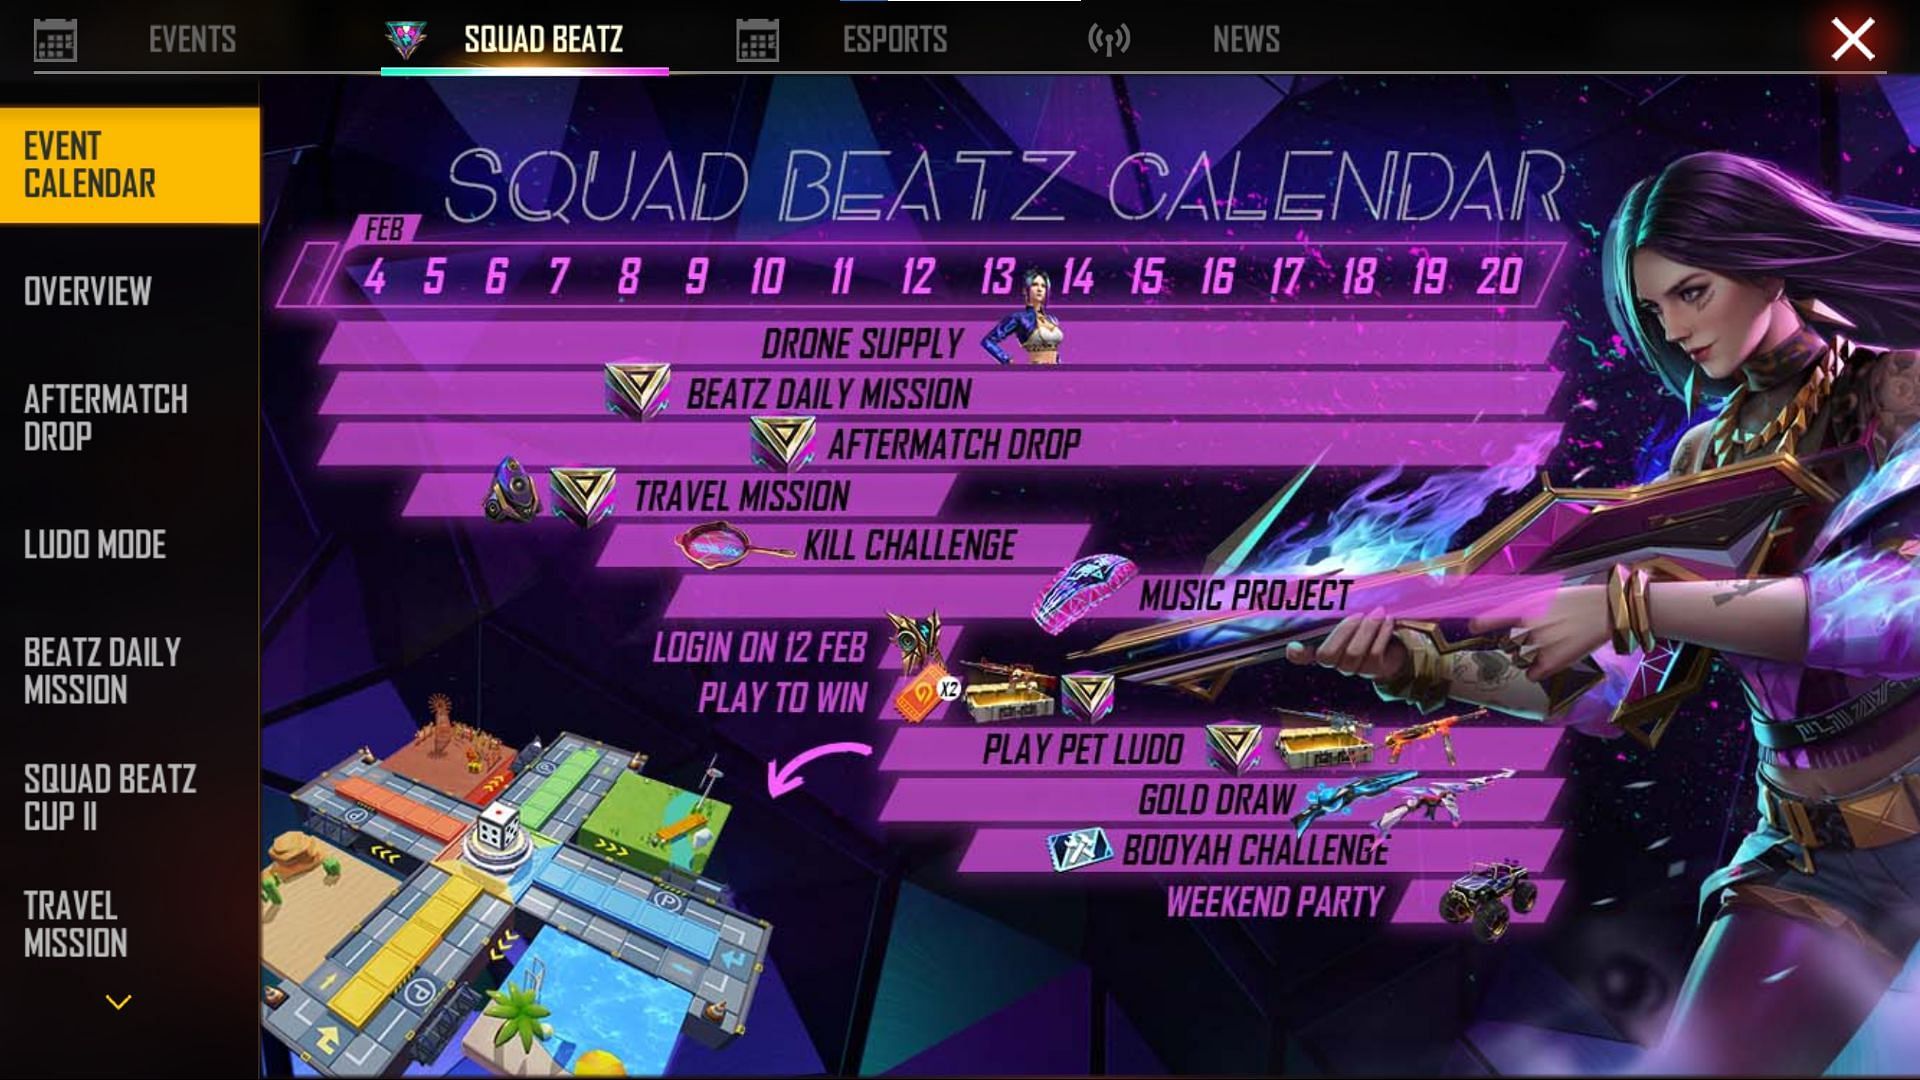 Select Weekend Party section (Image via Garena)